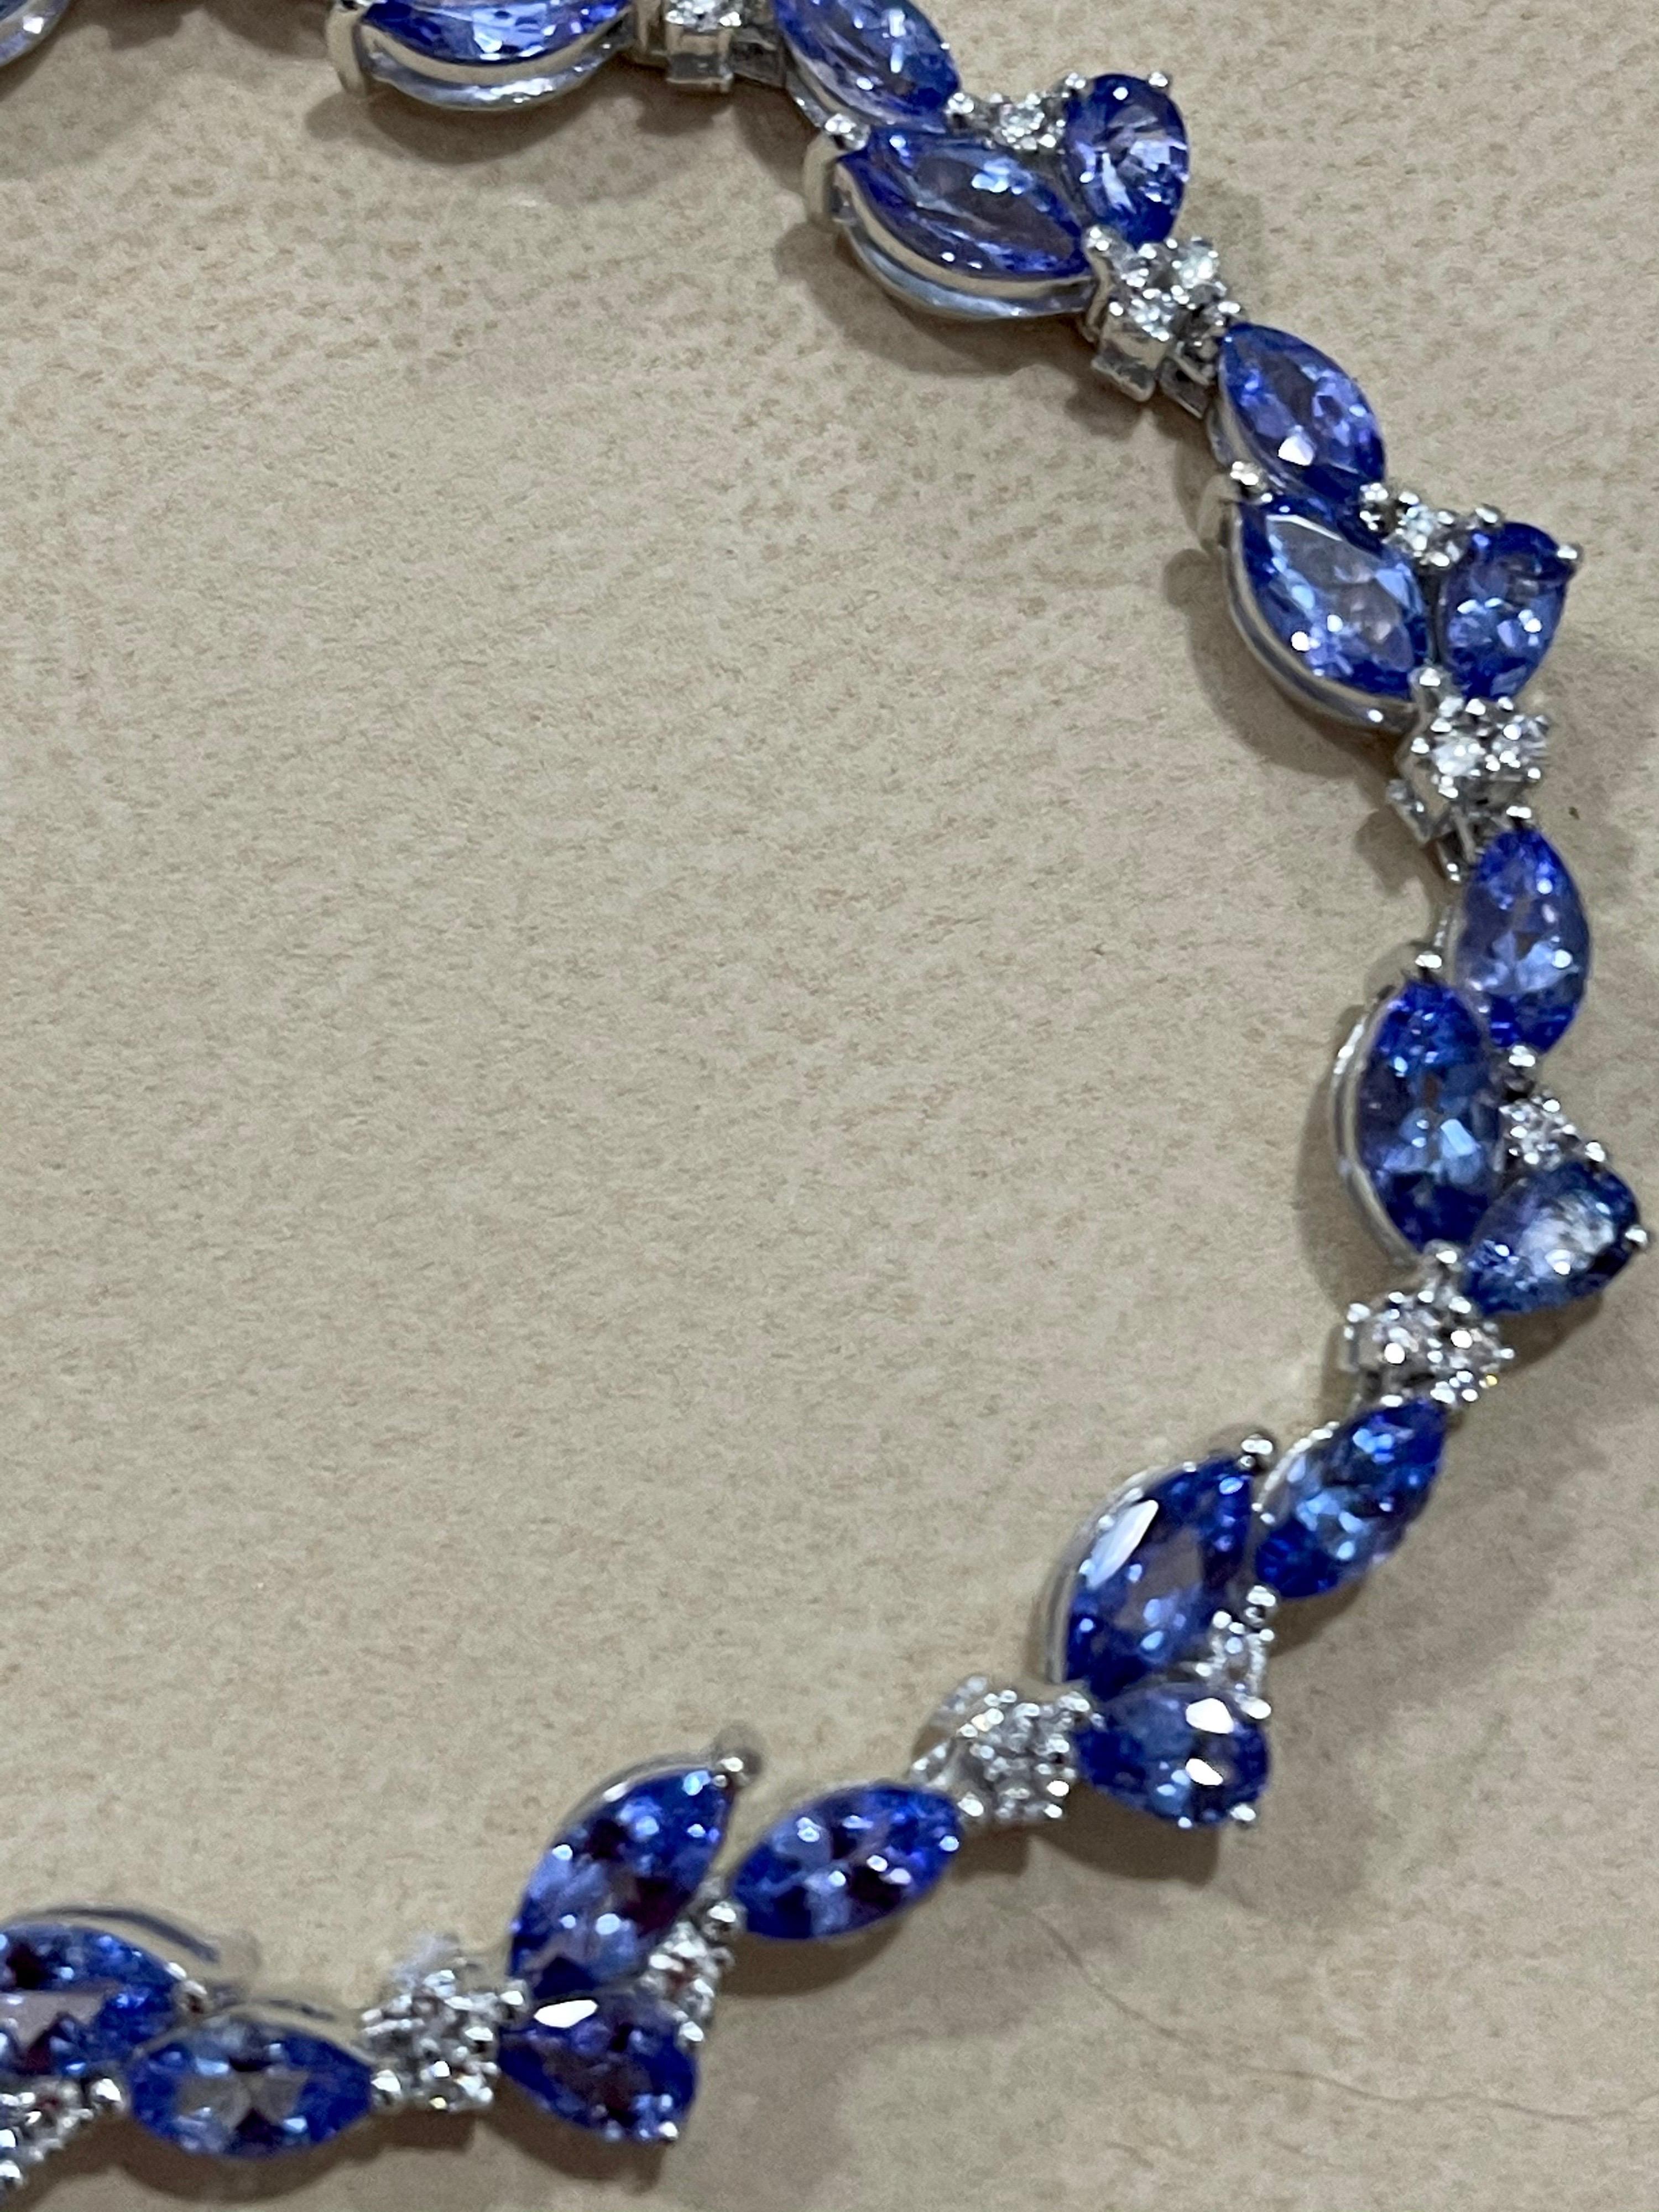  This exceptionally affordable Tennis  bracelet has  Multiple stones of  Tanzanite in Pear shape and in marquise shape  . 
 Total weight of Tanzanite  is 9.02 carat. Total number of diamonds are 39 and diamond weighs 0.5ct
The bracelet is expertly